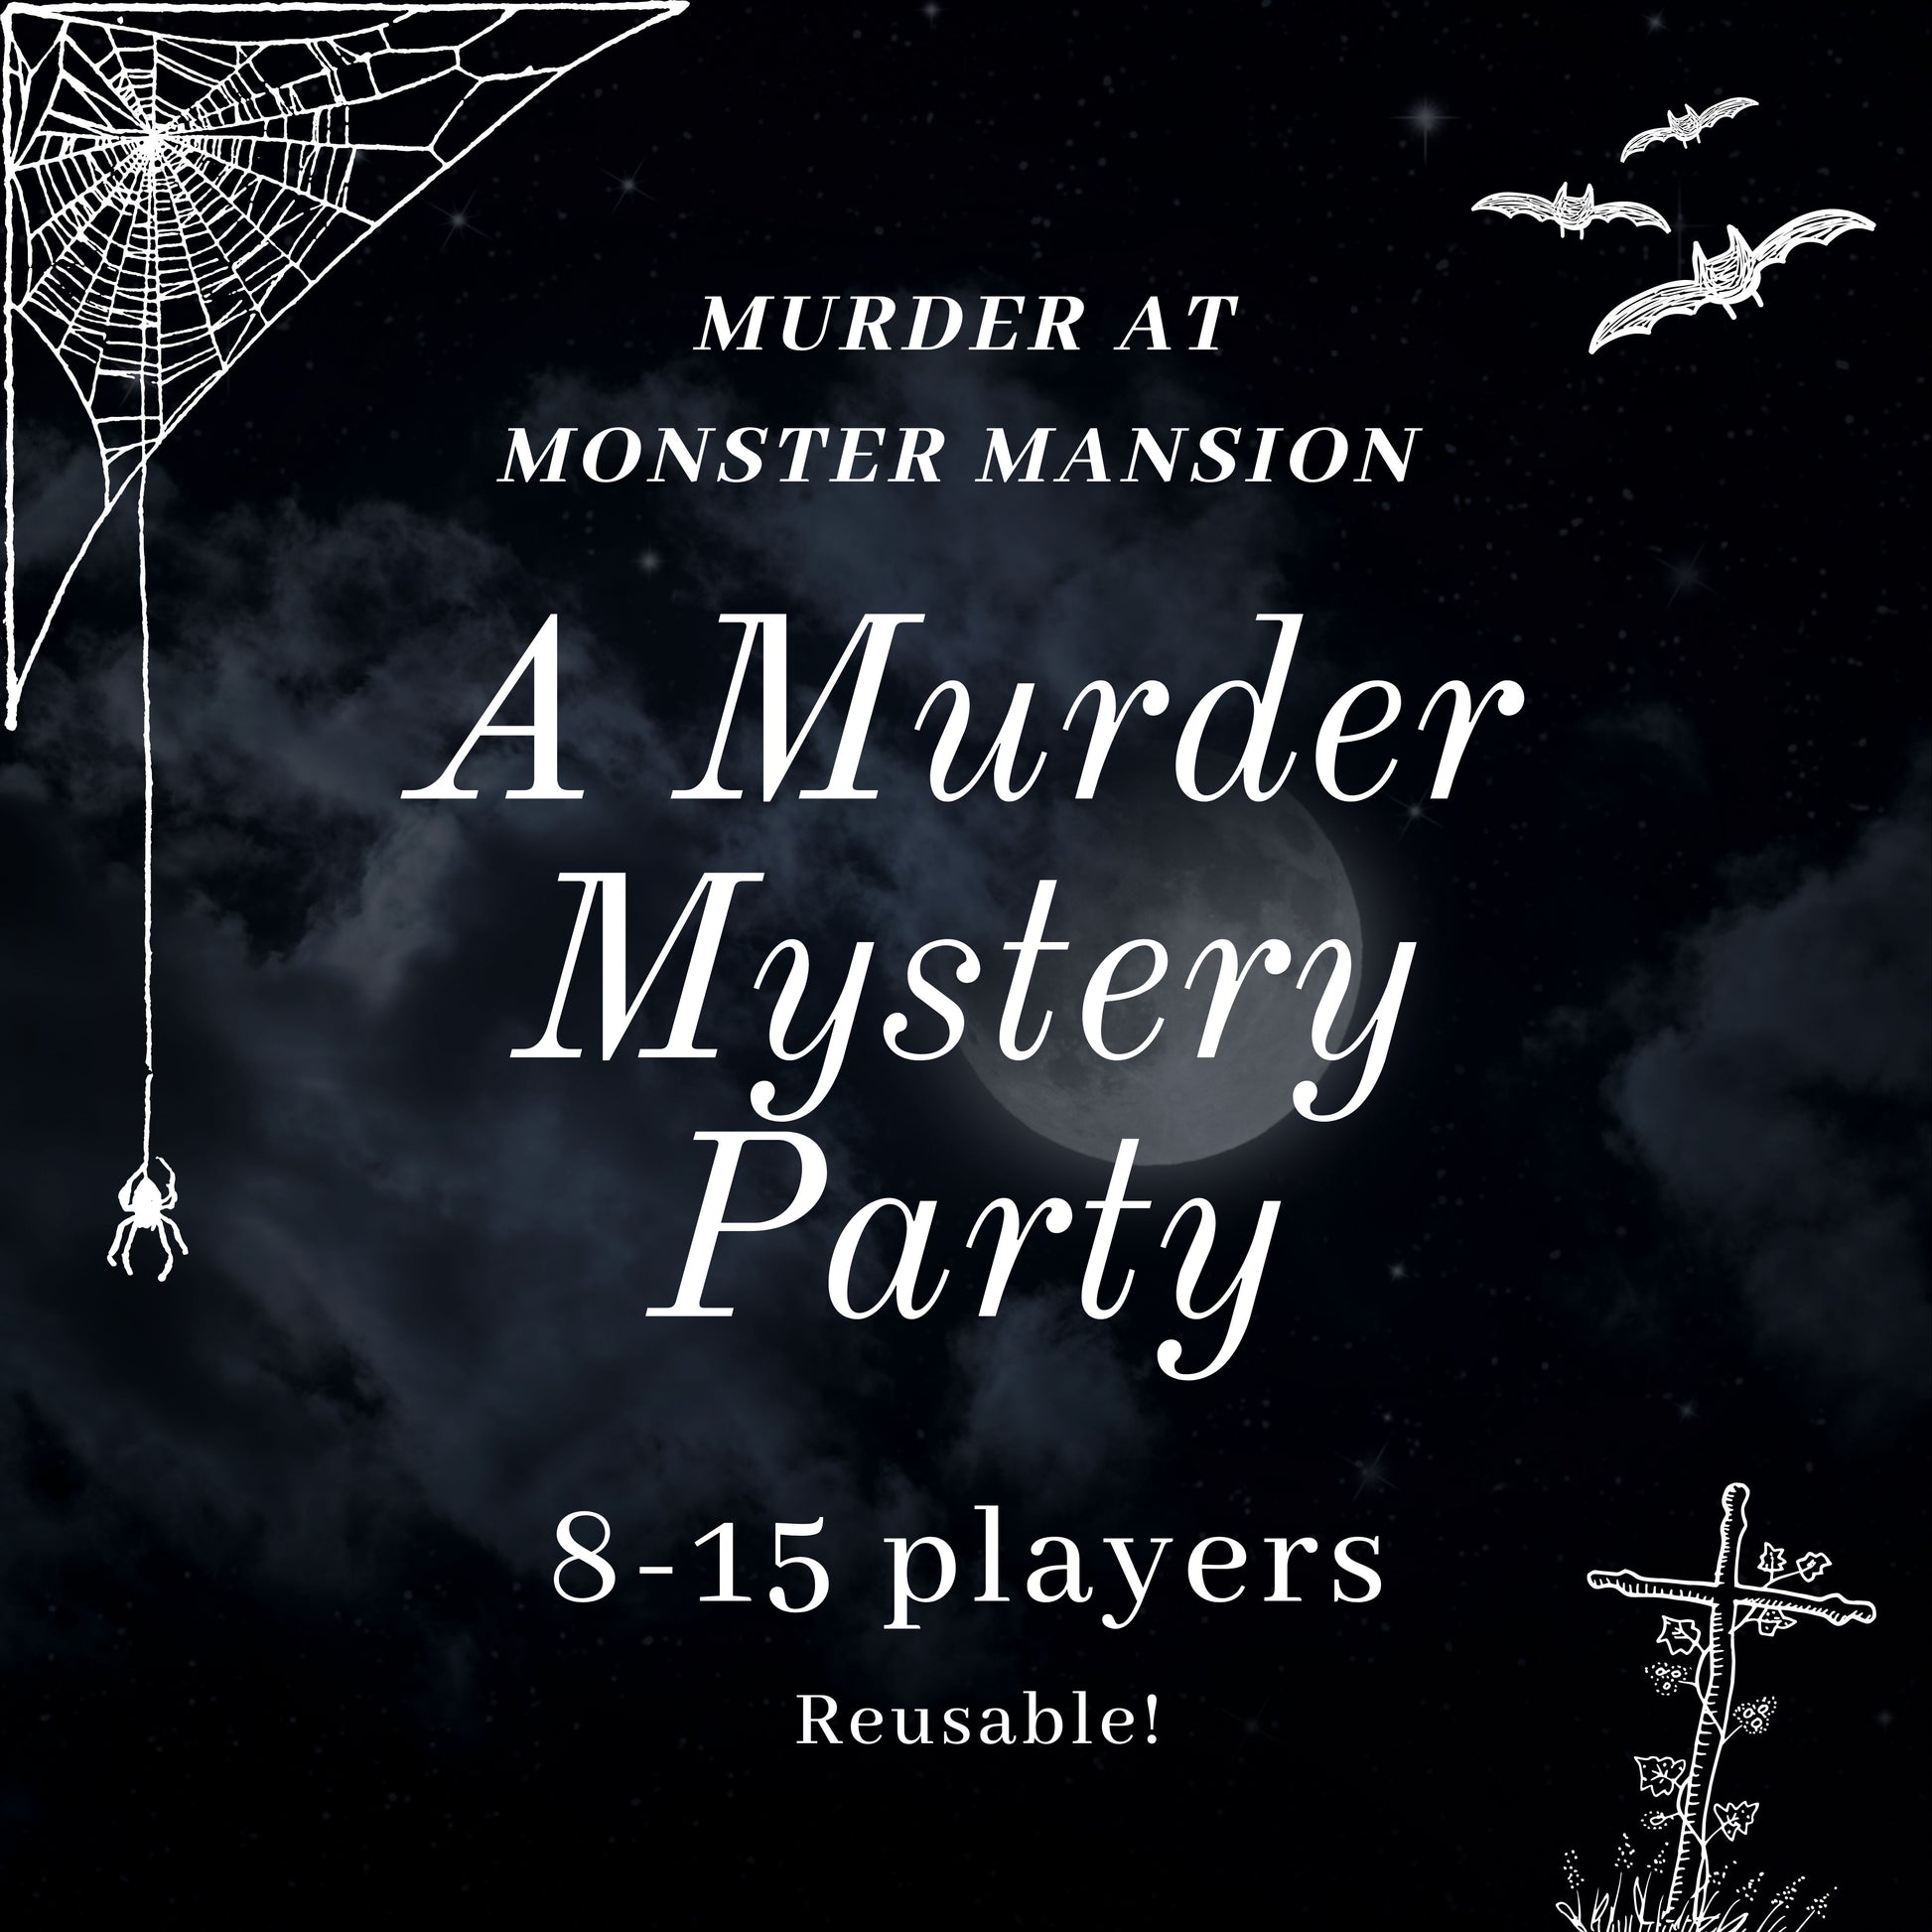 Fun and colourful fully scripted Monster Mansion party themed murder mystery party game for 8-15 players